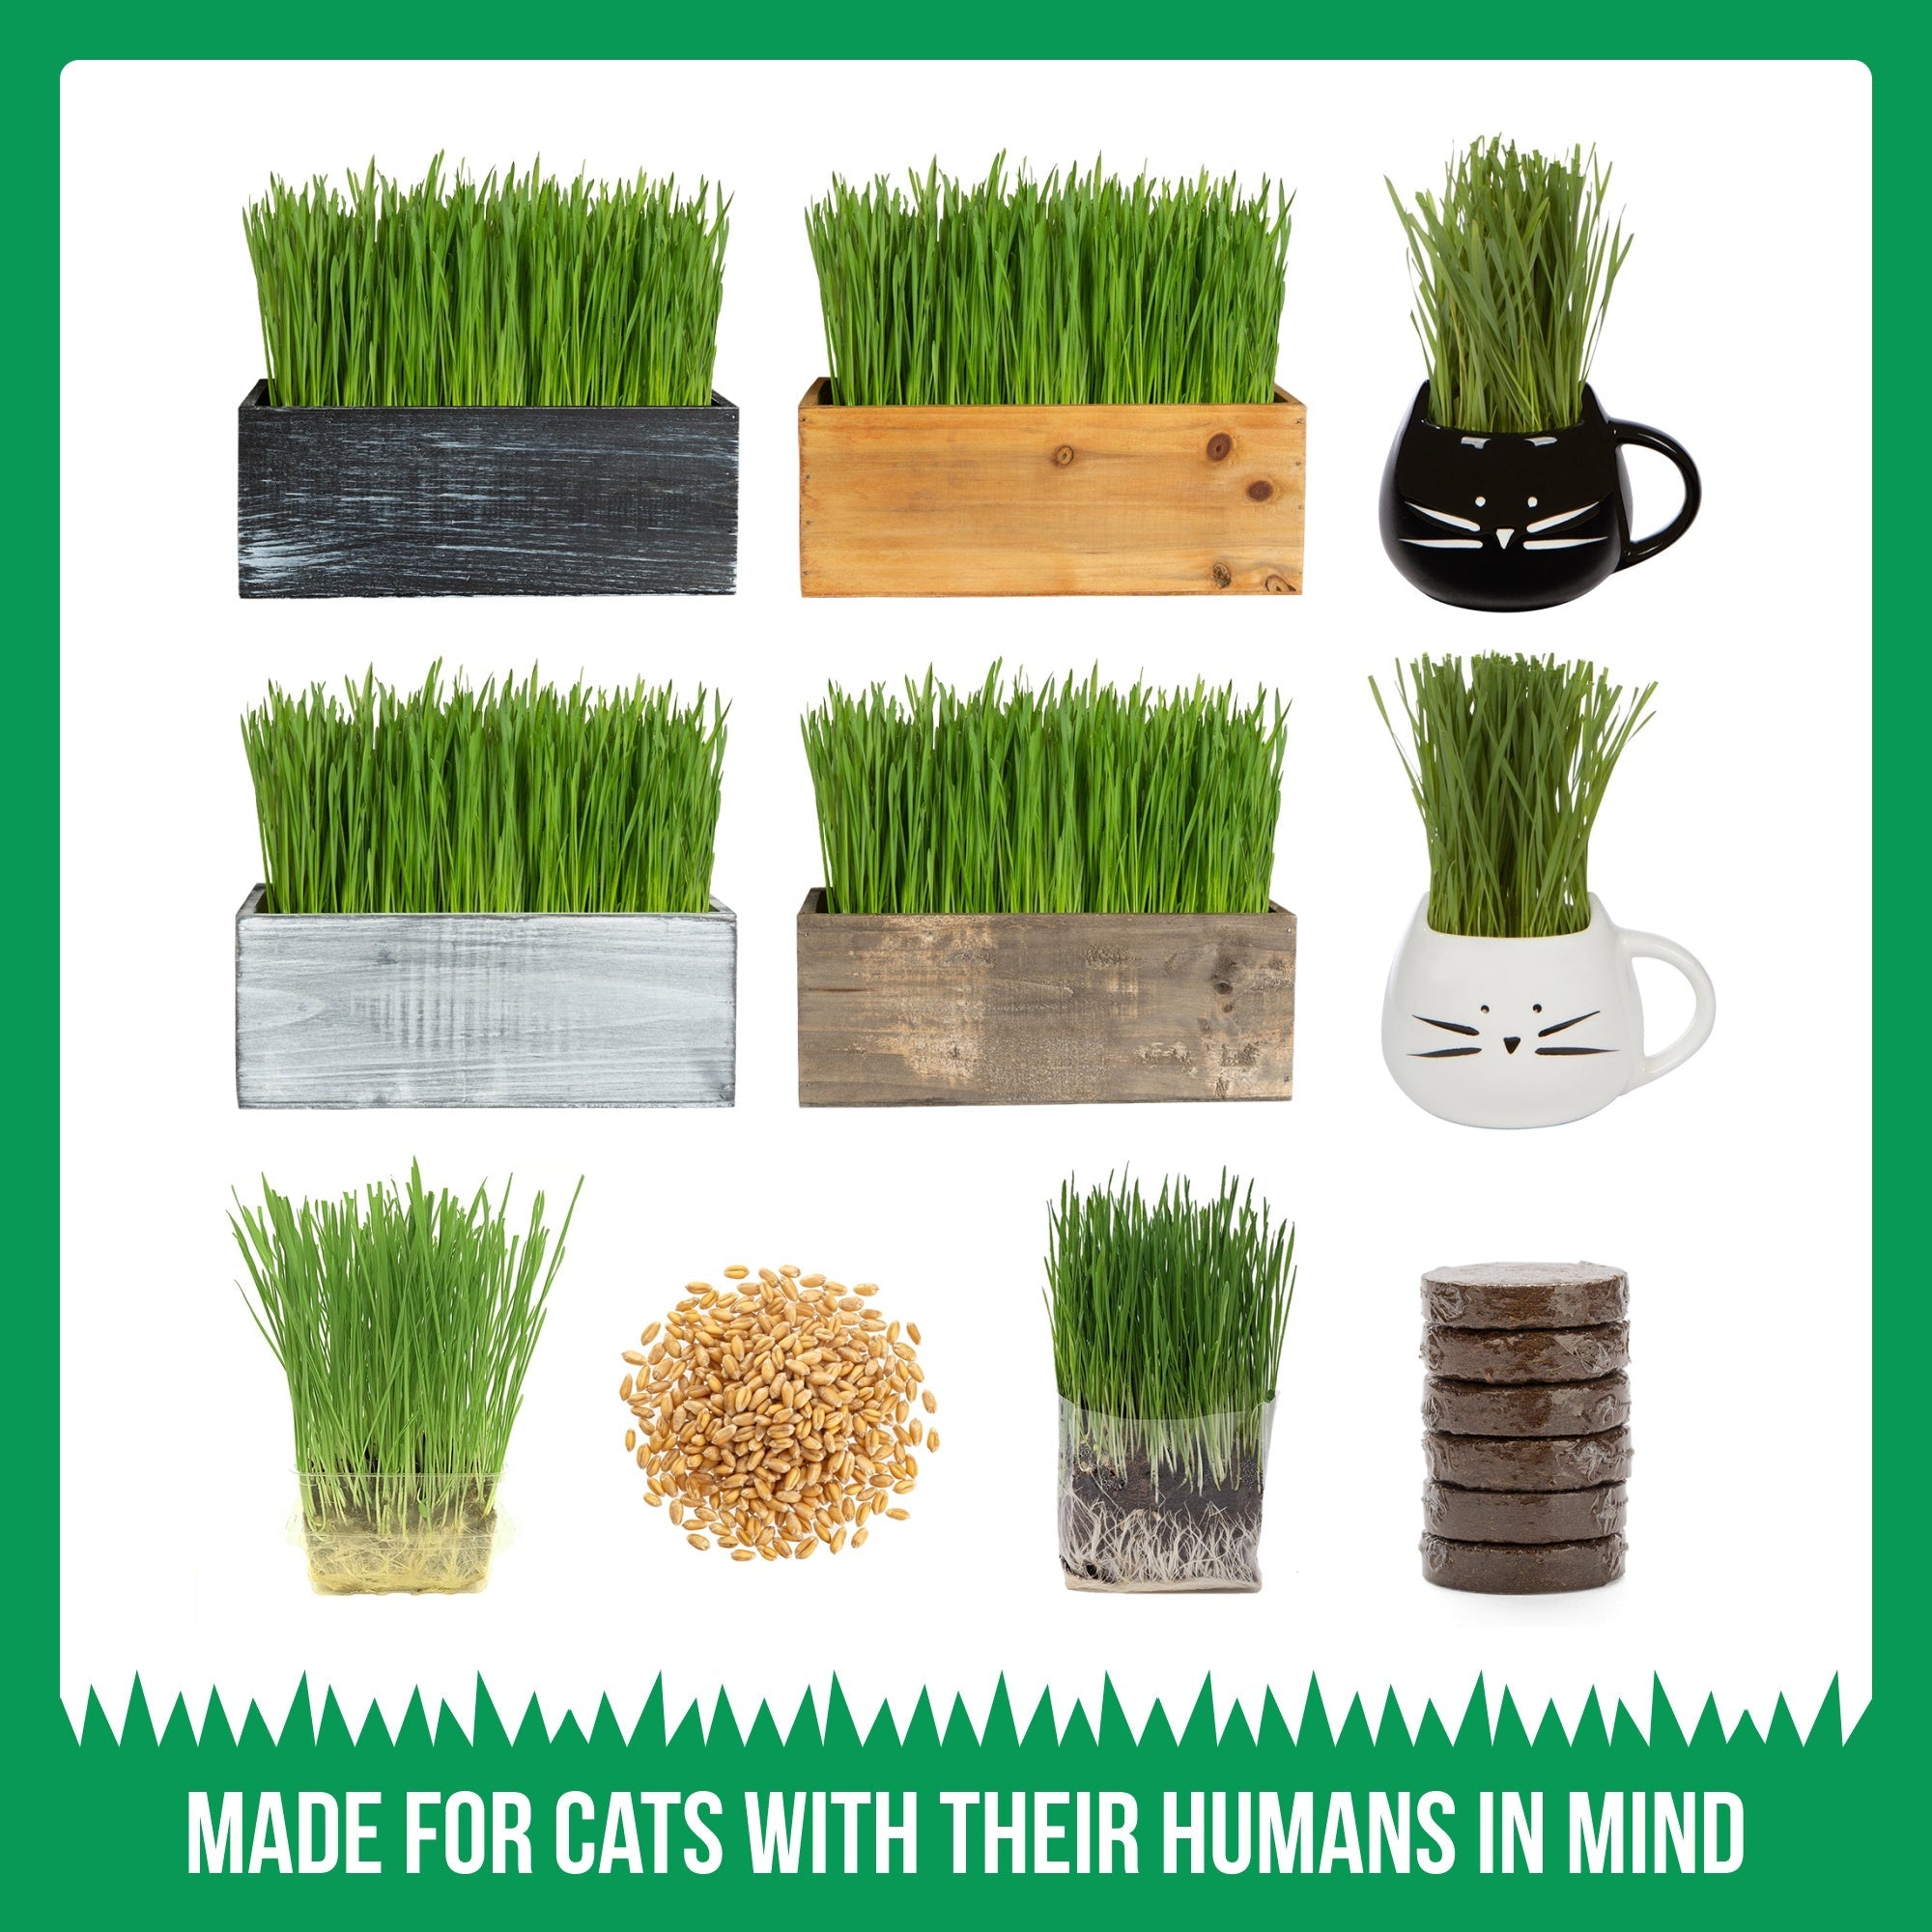 Cat Grass Kit (Organic) Complete with Rustic Wood Planter, Seed and Soil - Dark Brown